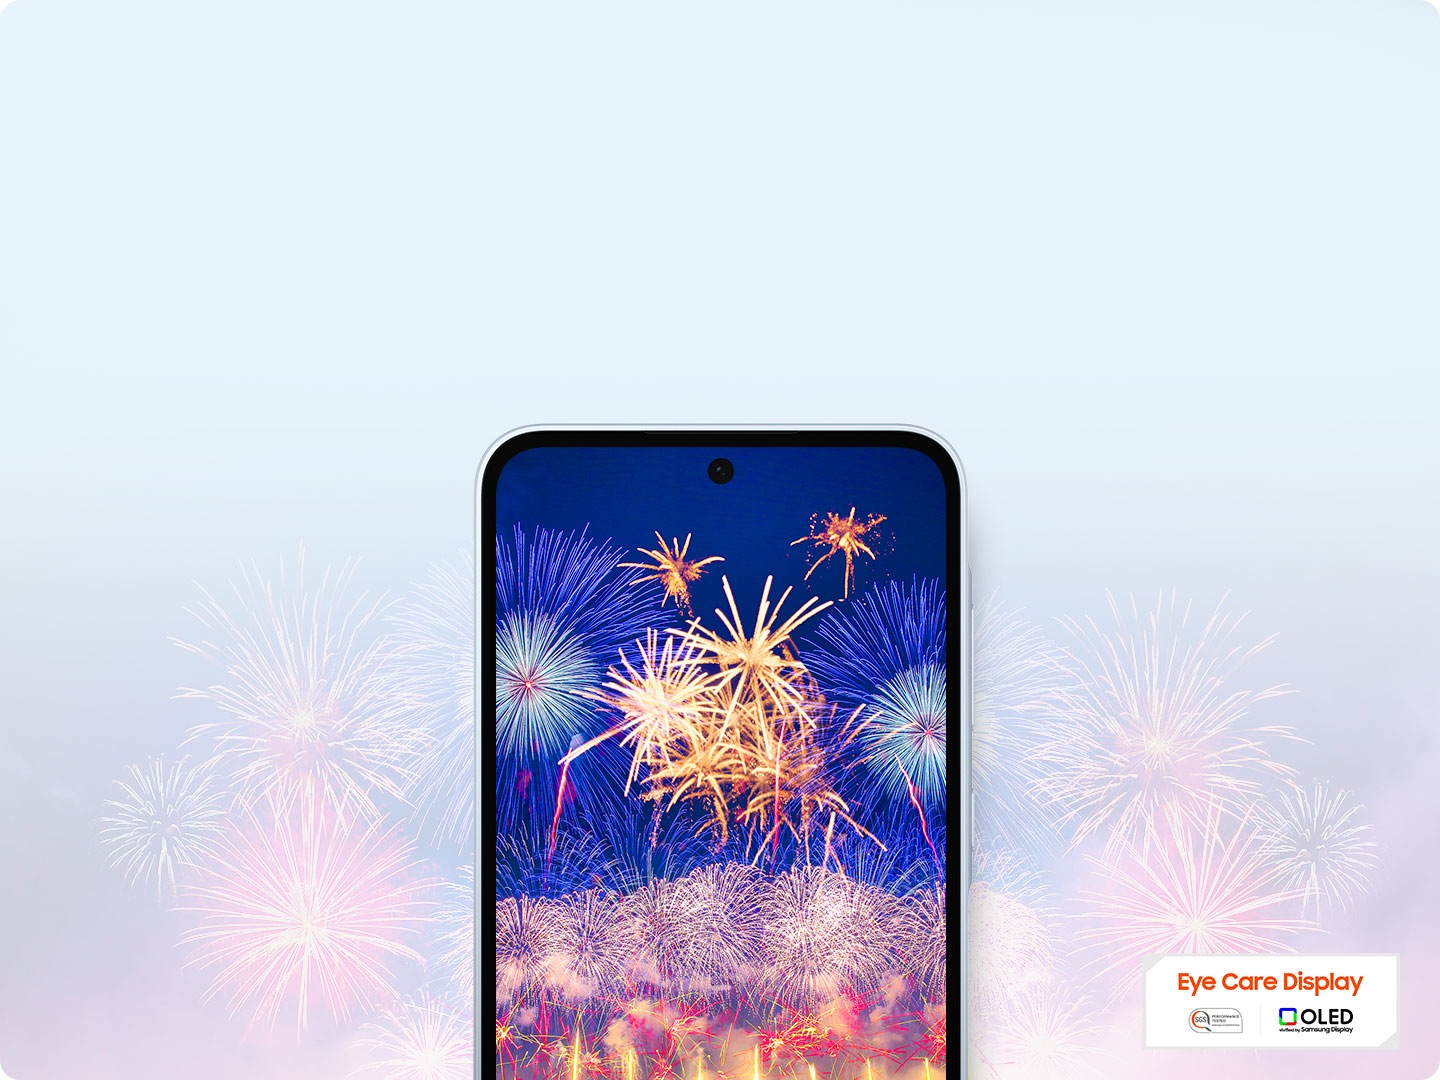 Samsung A35 5G smartphone is showcasing a vibrant display of fireworks on the screen. With an 'Eye Care Display' and OLED technology logo.